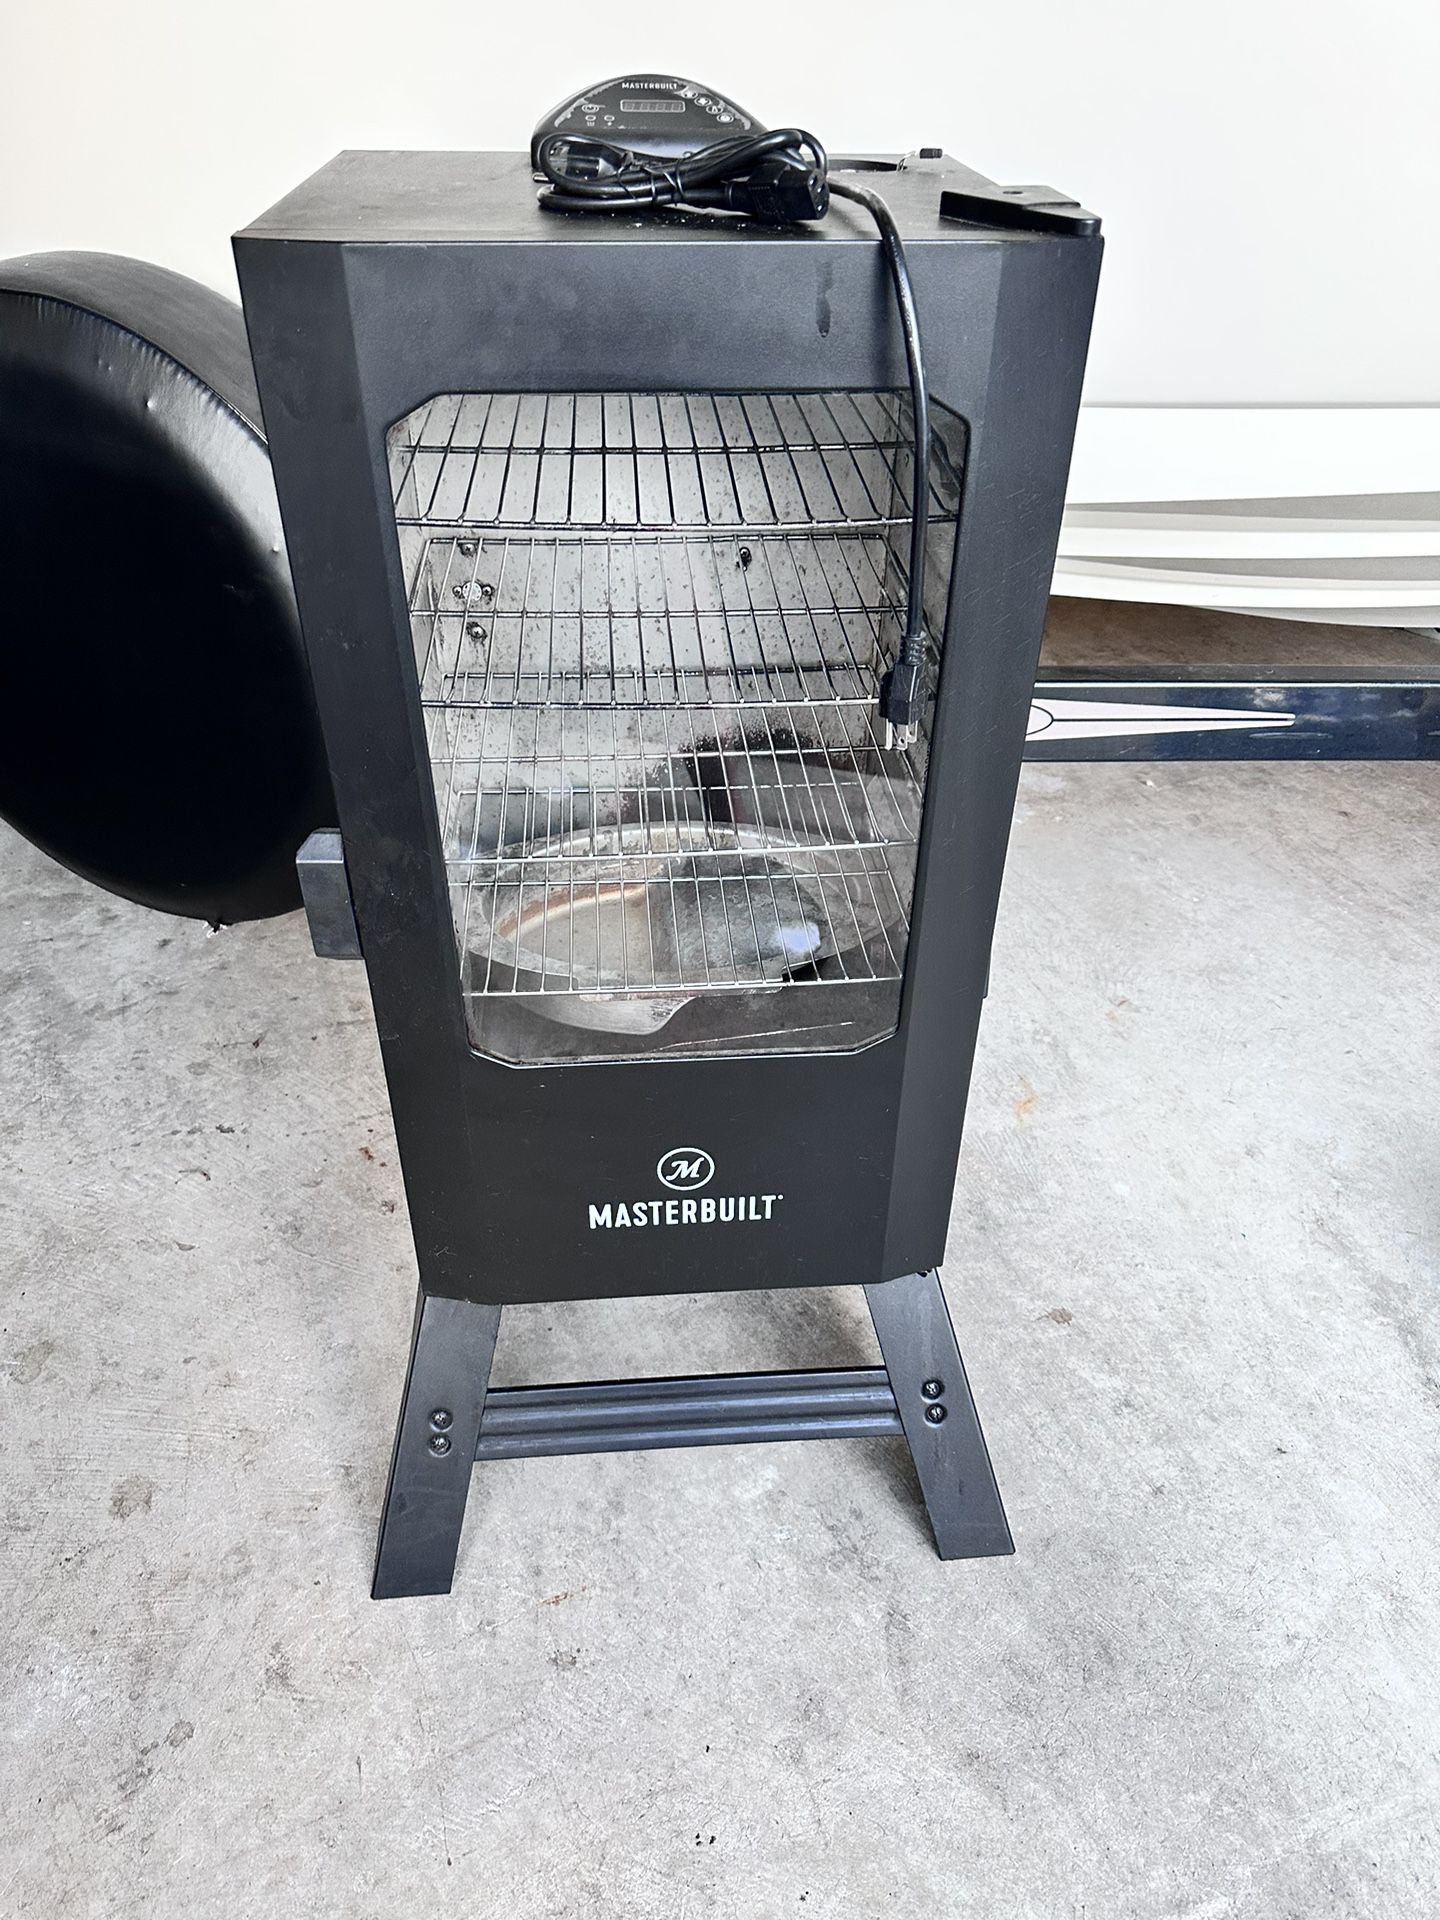 Masterbuilt Electric Smoker for Sale in Seattle, WA - OfferUp